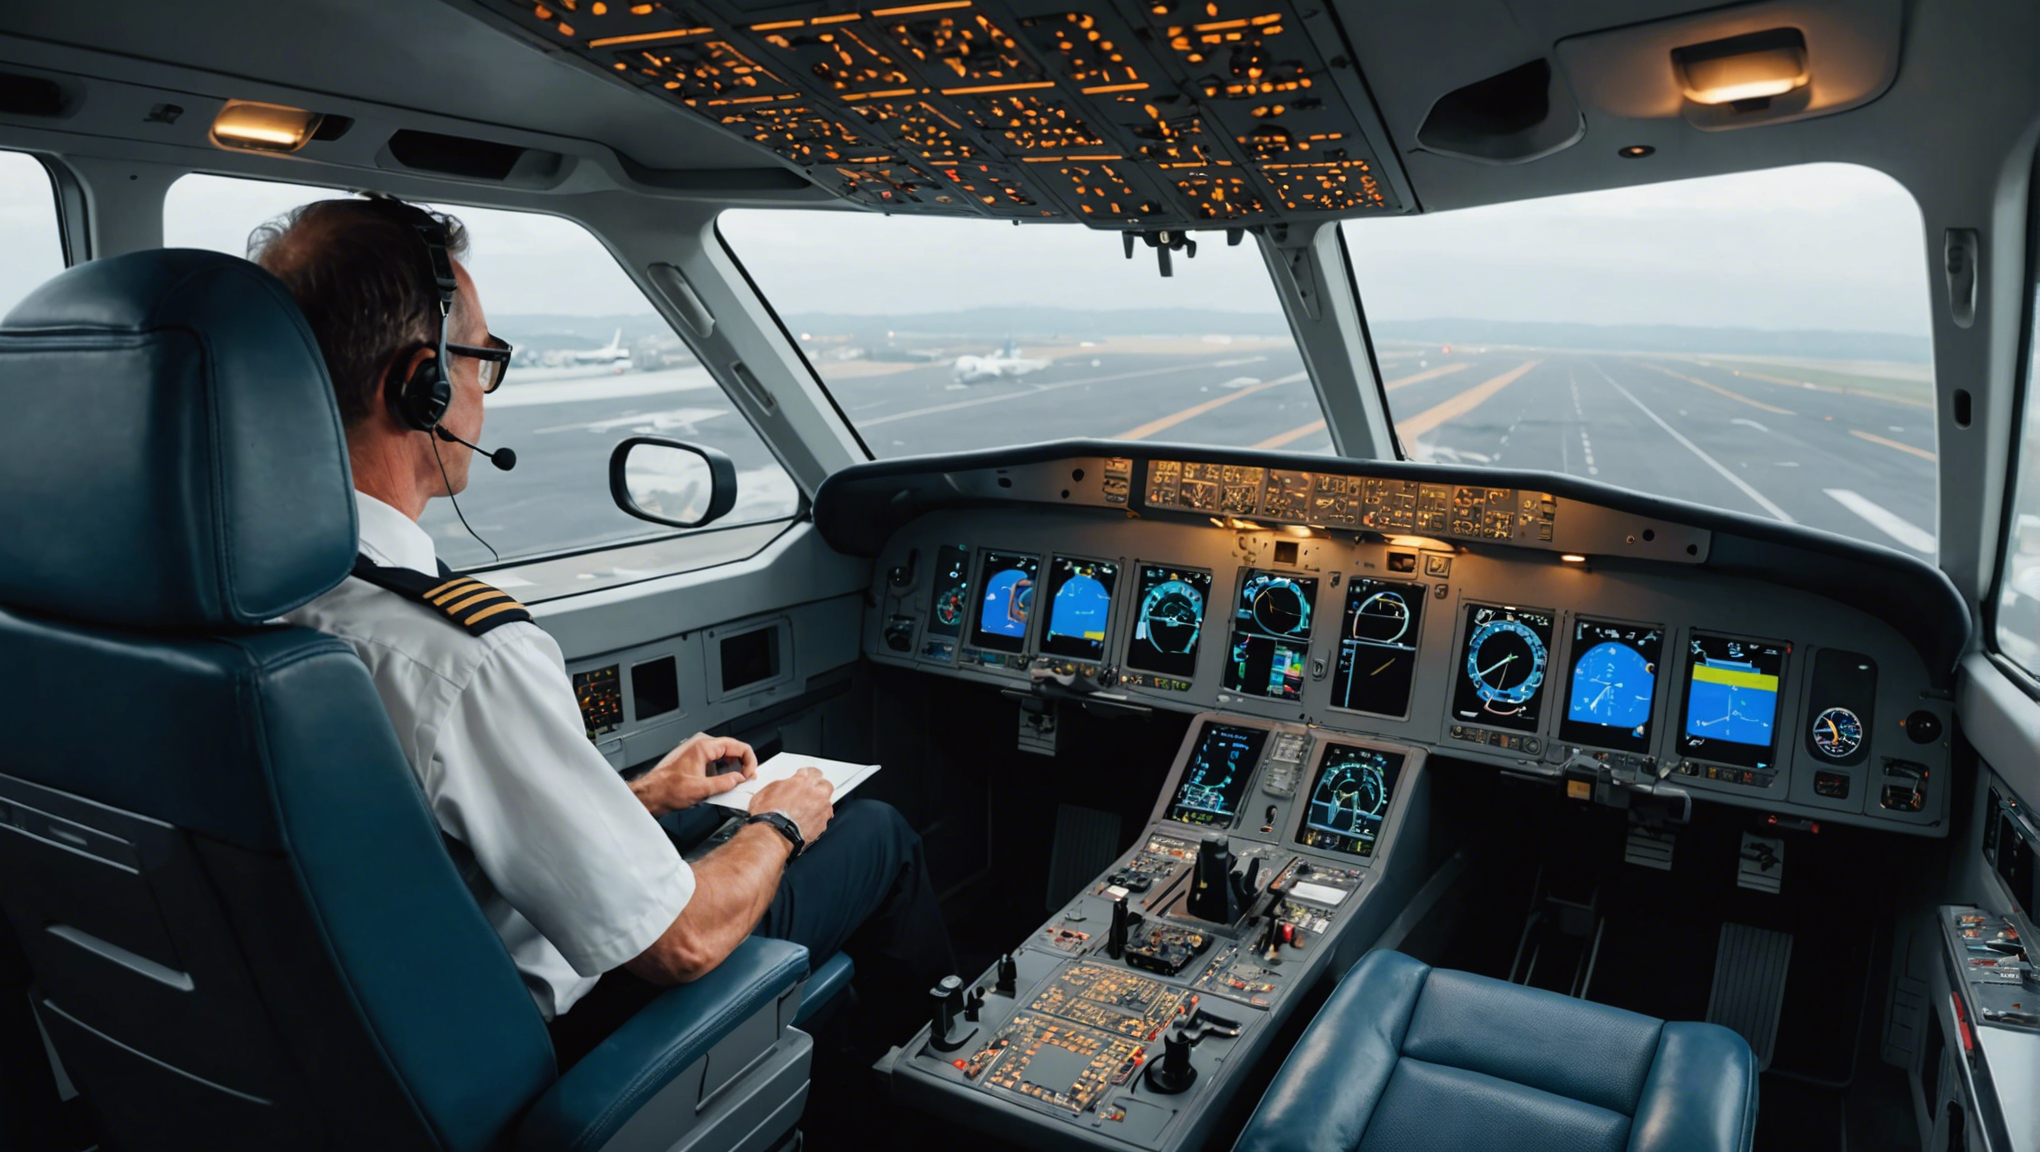 find out what you need to know to ensure your safety before you take off. don't take any risks and follow these recommendations for a worry-free trip.